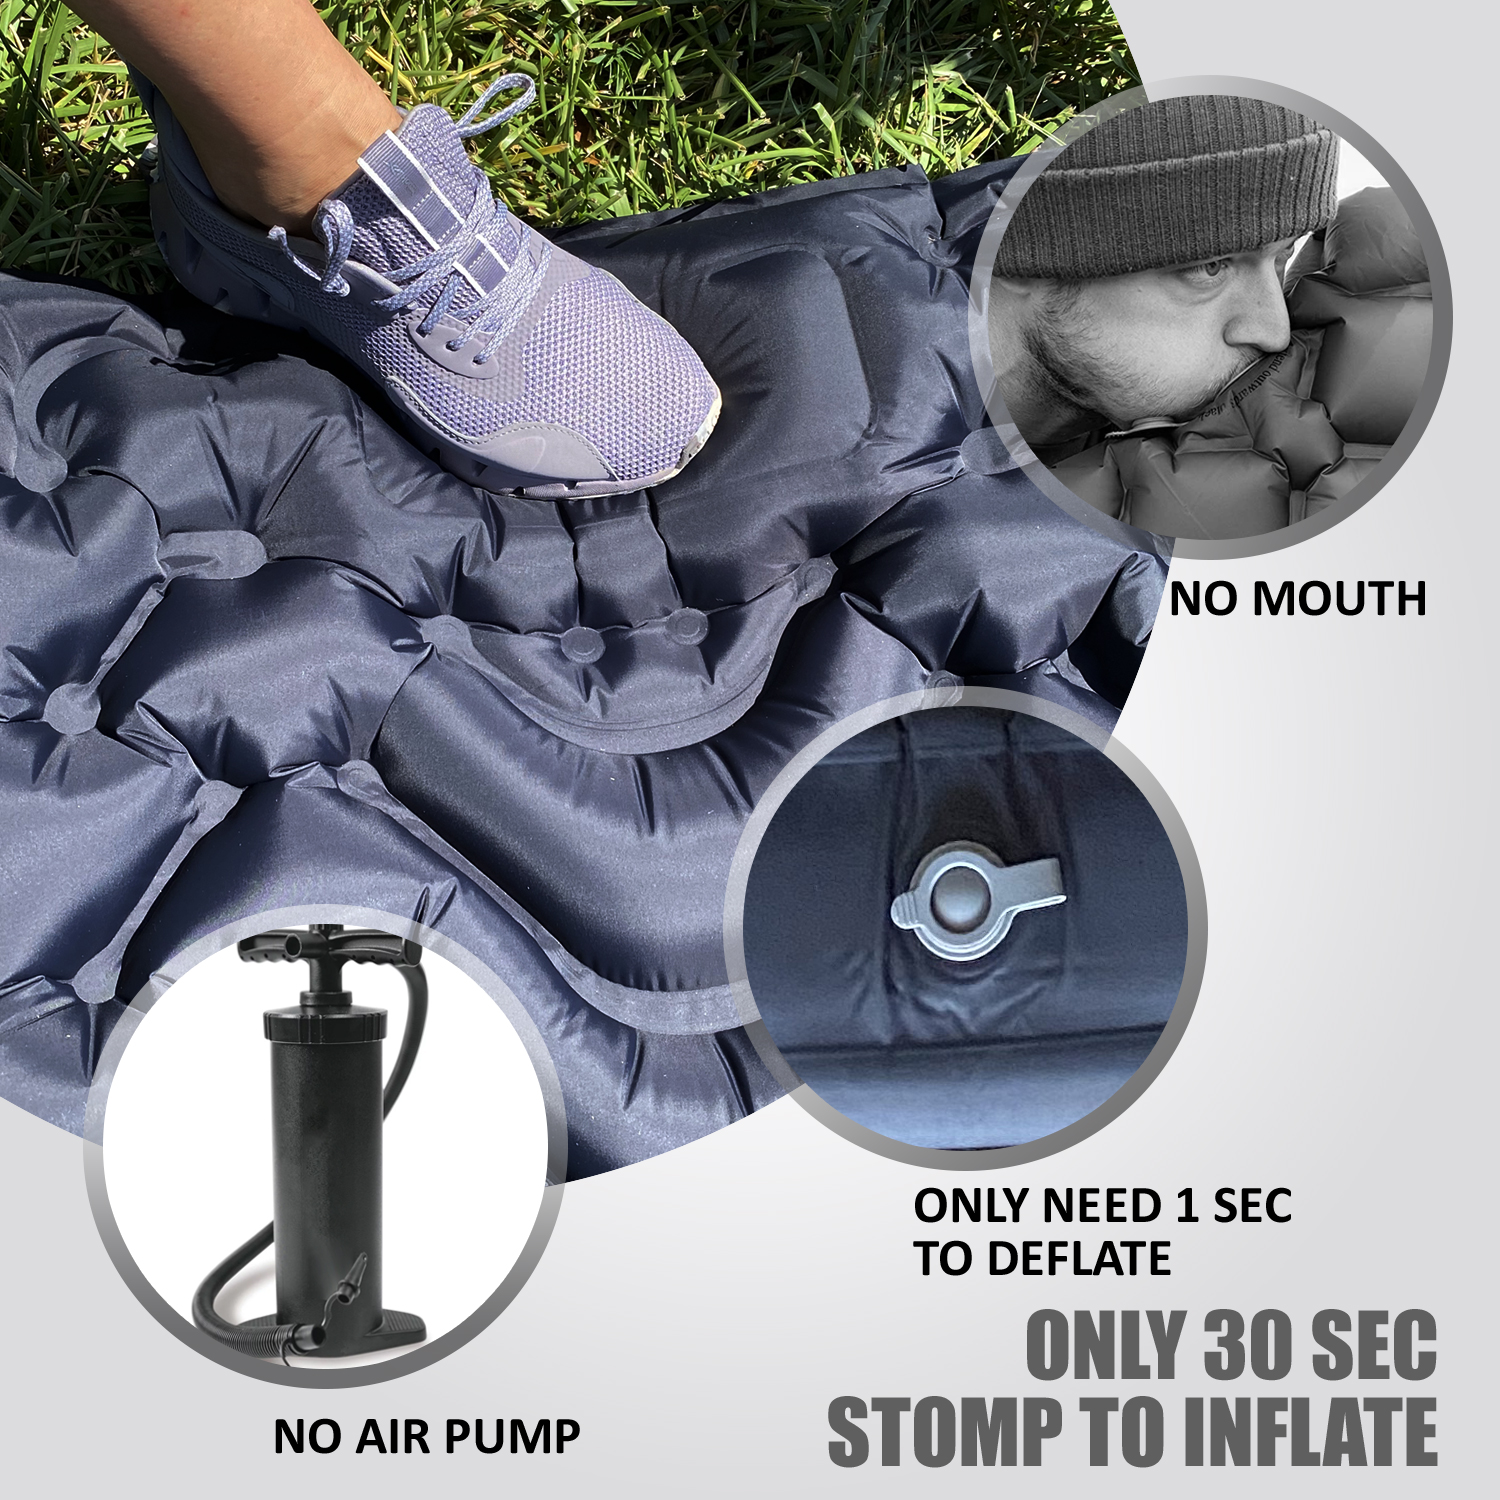 Ultralight Inflatable Sleeping Pad for Camping, Backpacking, Hiking, Travel, Built-In Step Inflating Air Pump, Integrated Pillow, Indoor Outdoor Firm Sleep Support, Compact and Portable, Black - image 2 of 6